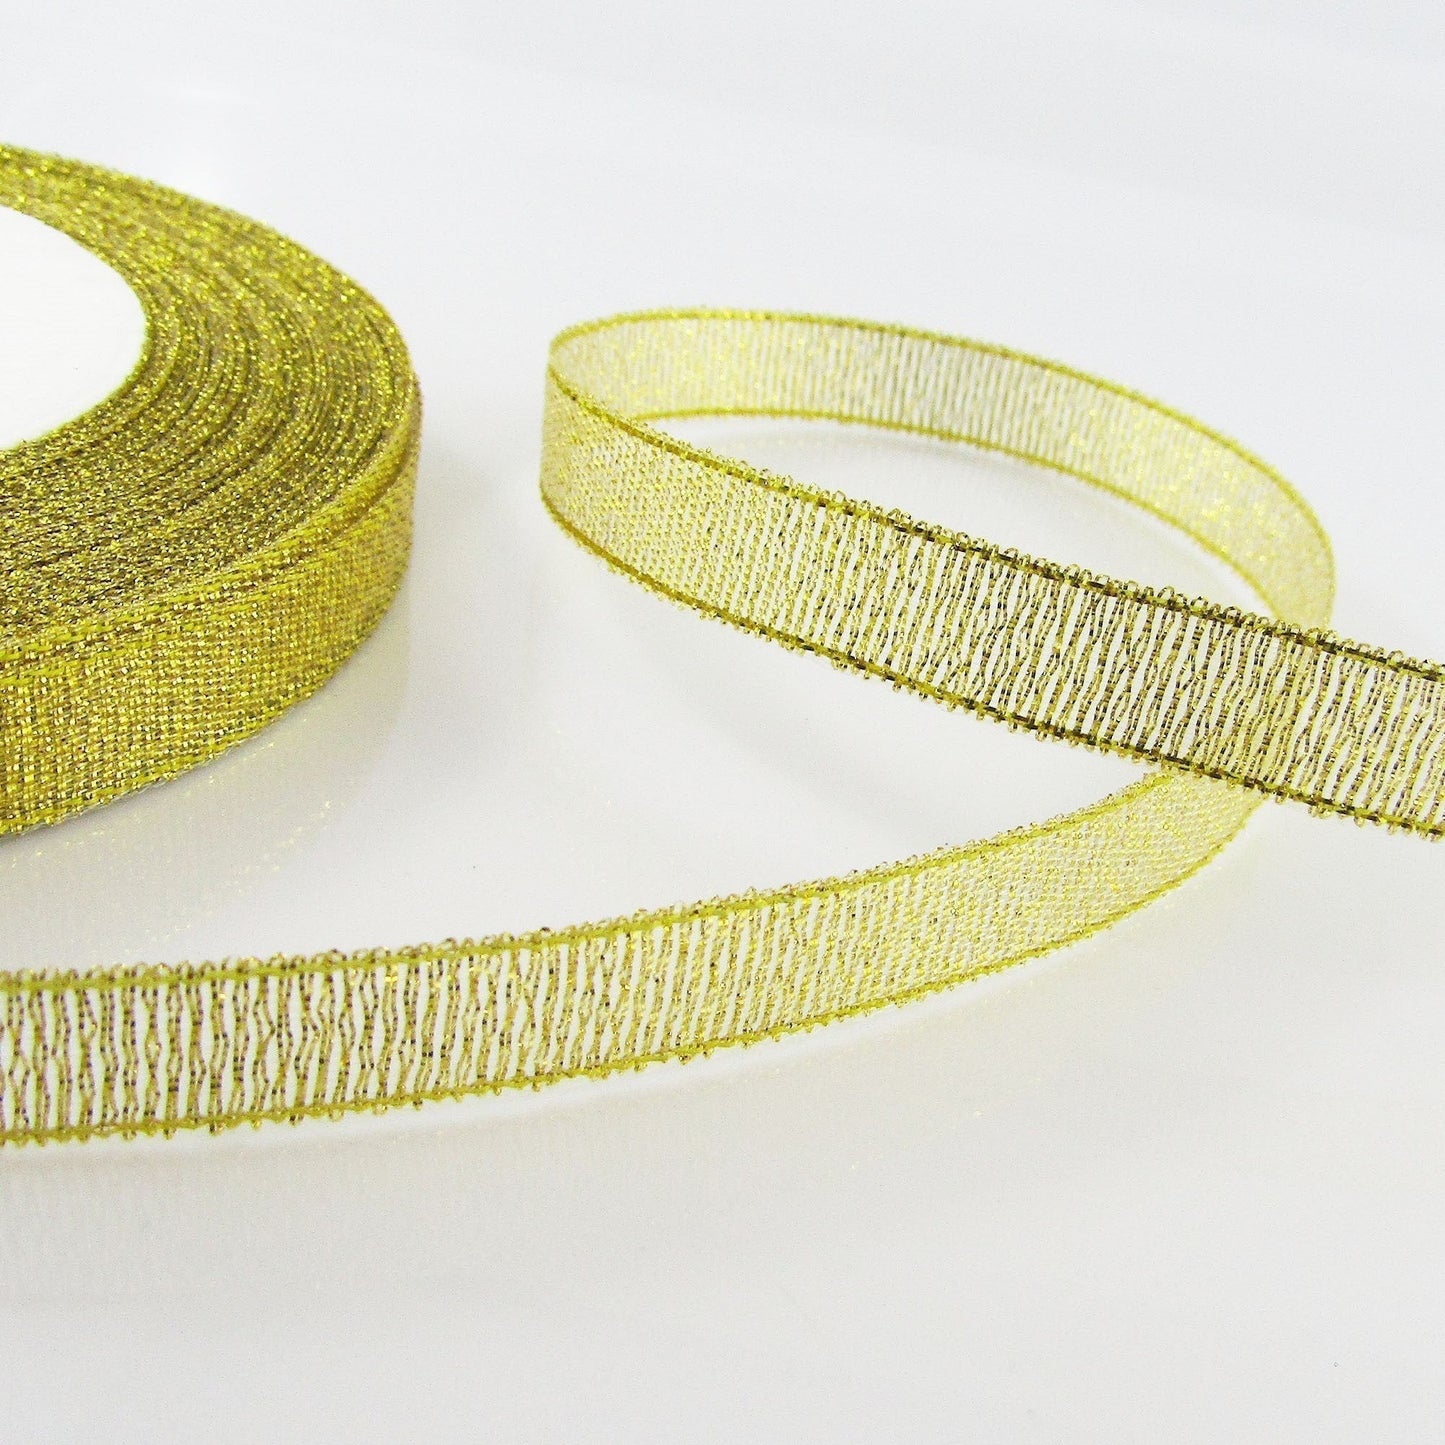 1roll (22metres) 10mm Glitter Metallic Ribbon Gold or Silver Great for Christmas